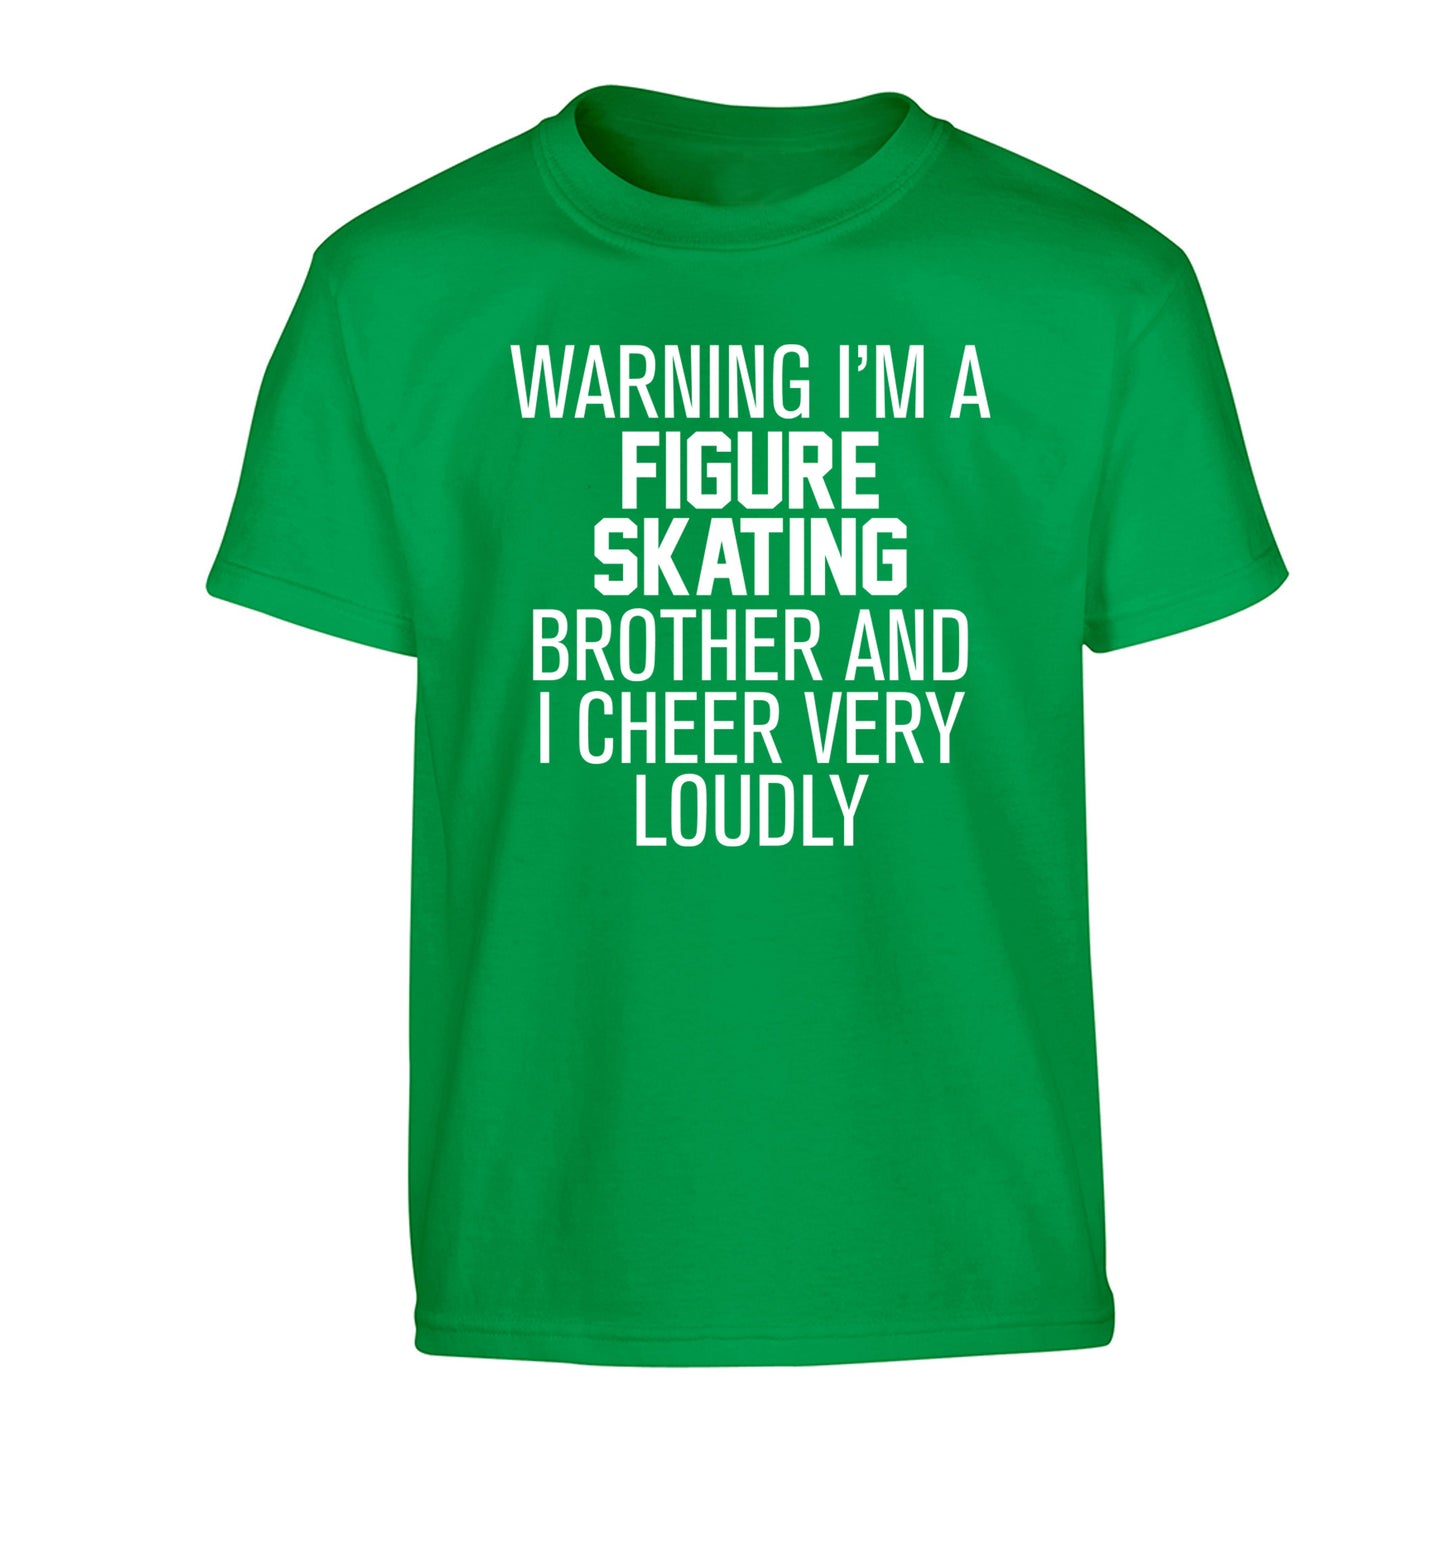 Warning I'm a figure skating brother and I cheer very loudly Children's green Tshirt 12-14 Years